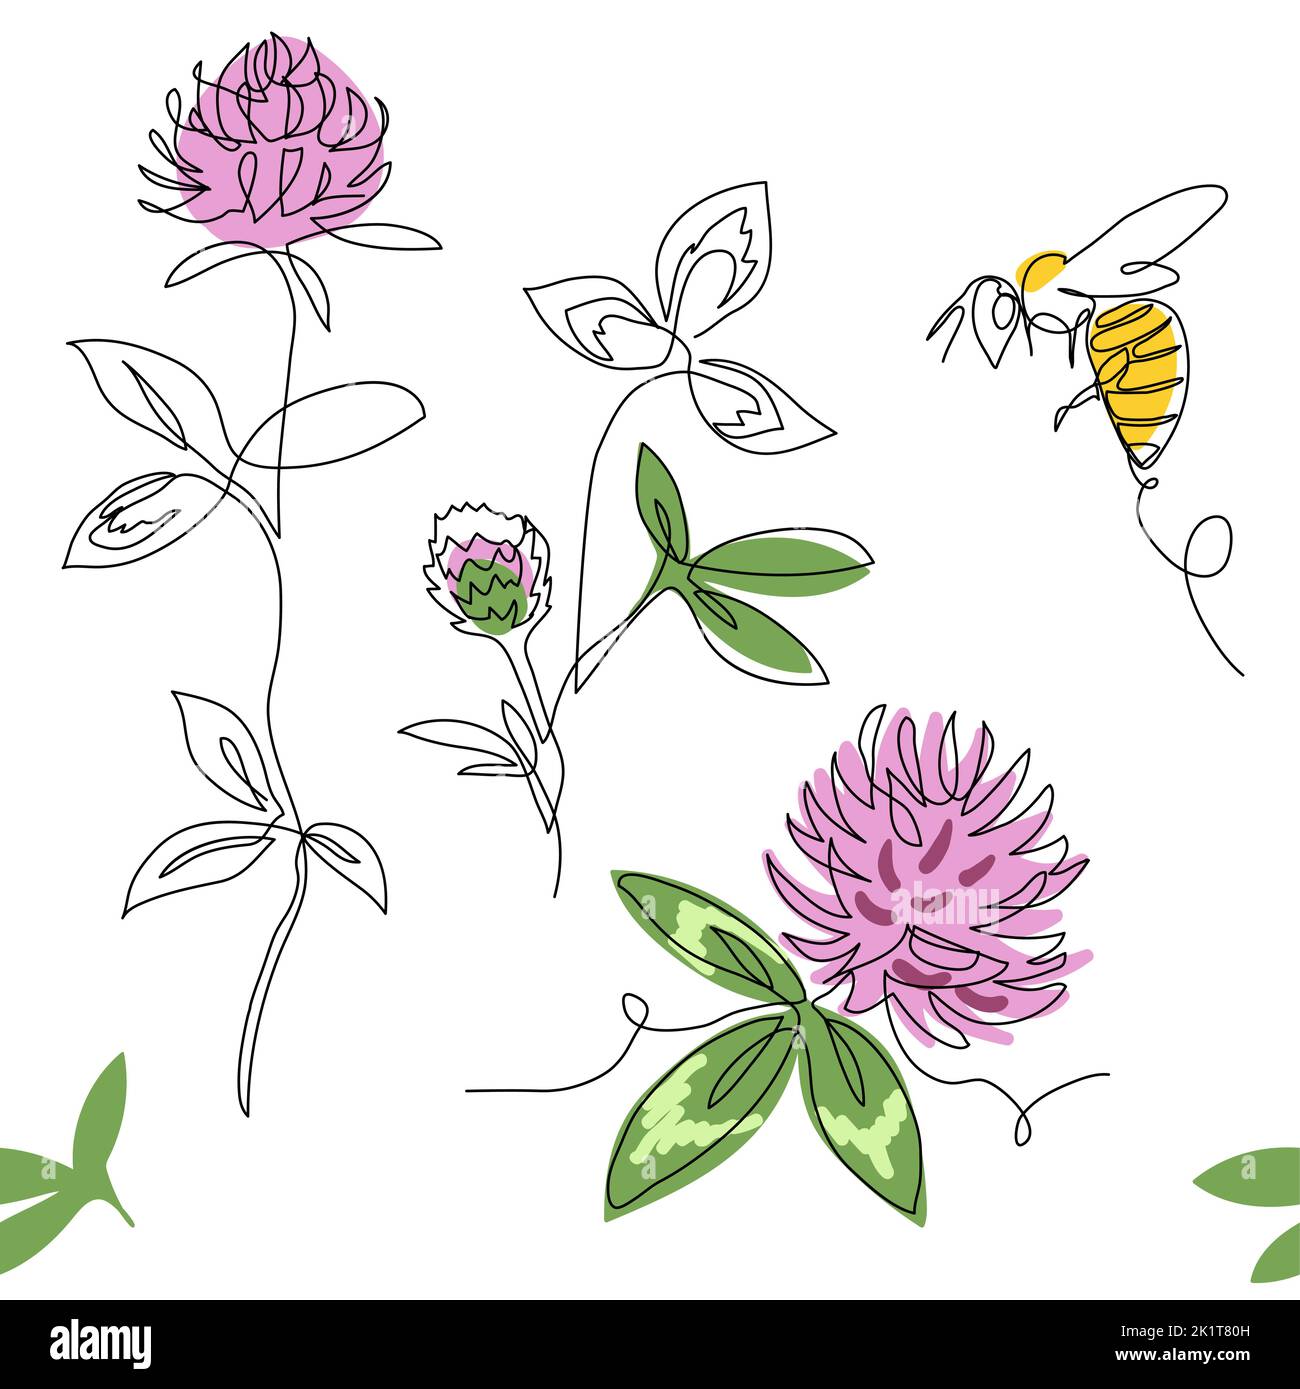 Clover flowers vector pattern with bee. One continuous line art drawing meadow pattern with clover flowers Stock Vector